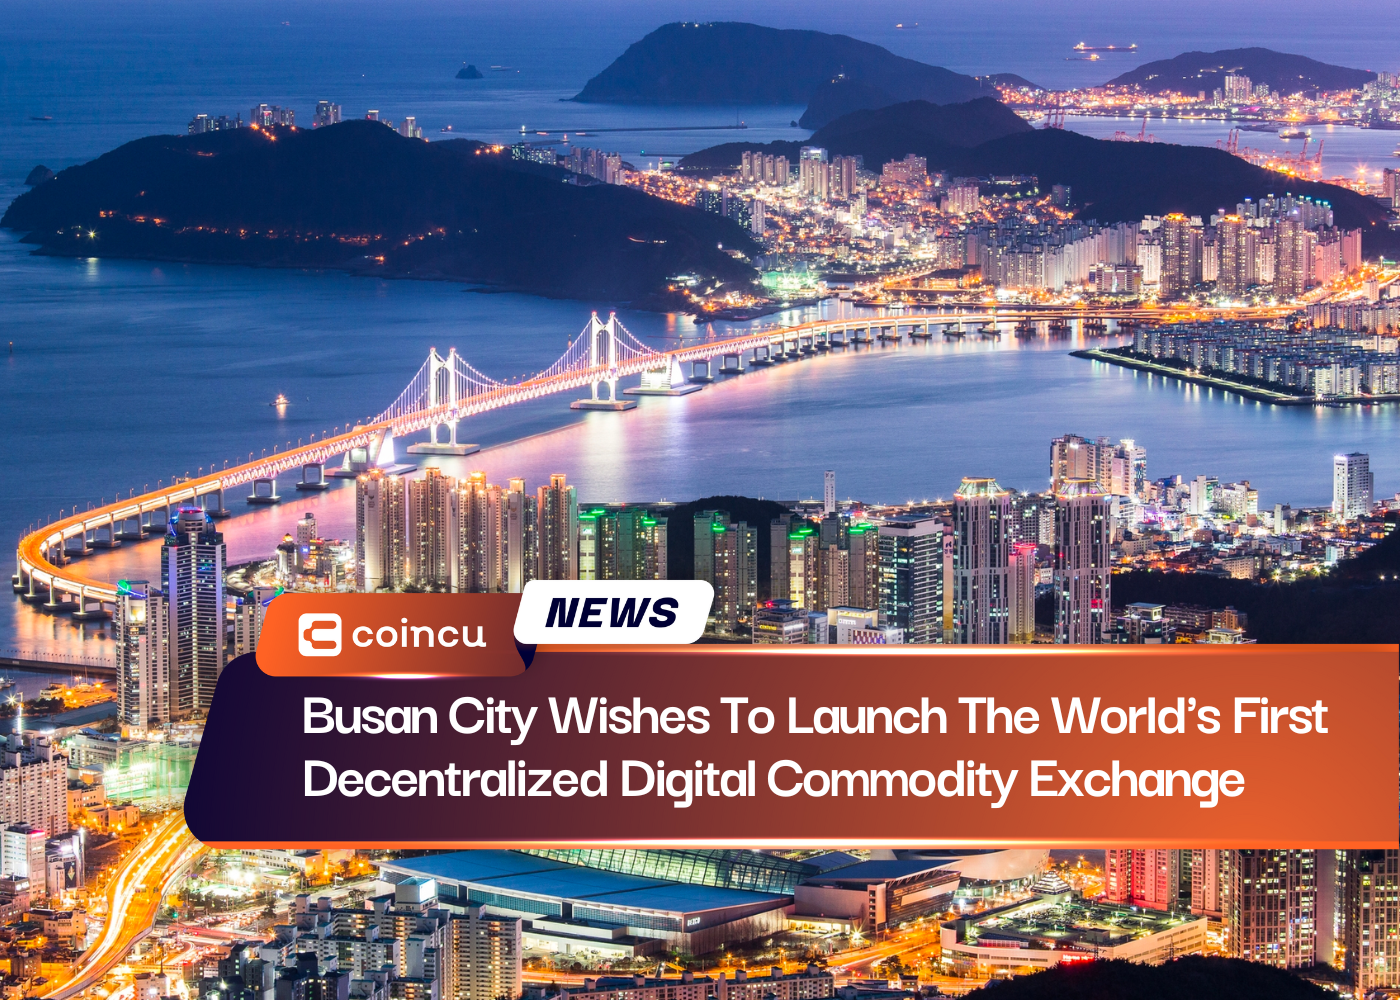 Busan City Wishes To Launch The World's First Decentralized Digital Commodity Exchange